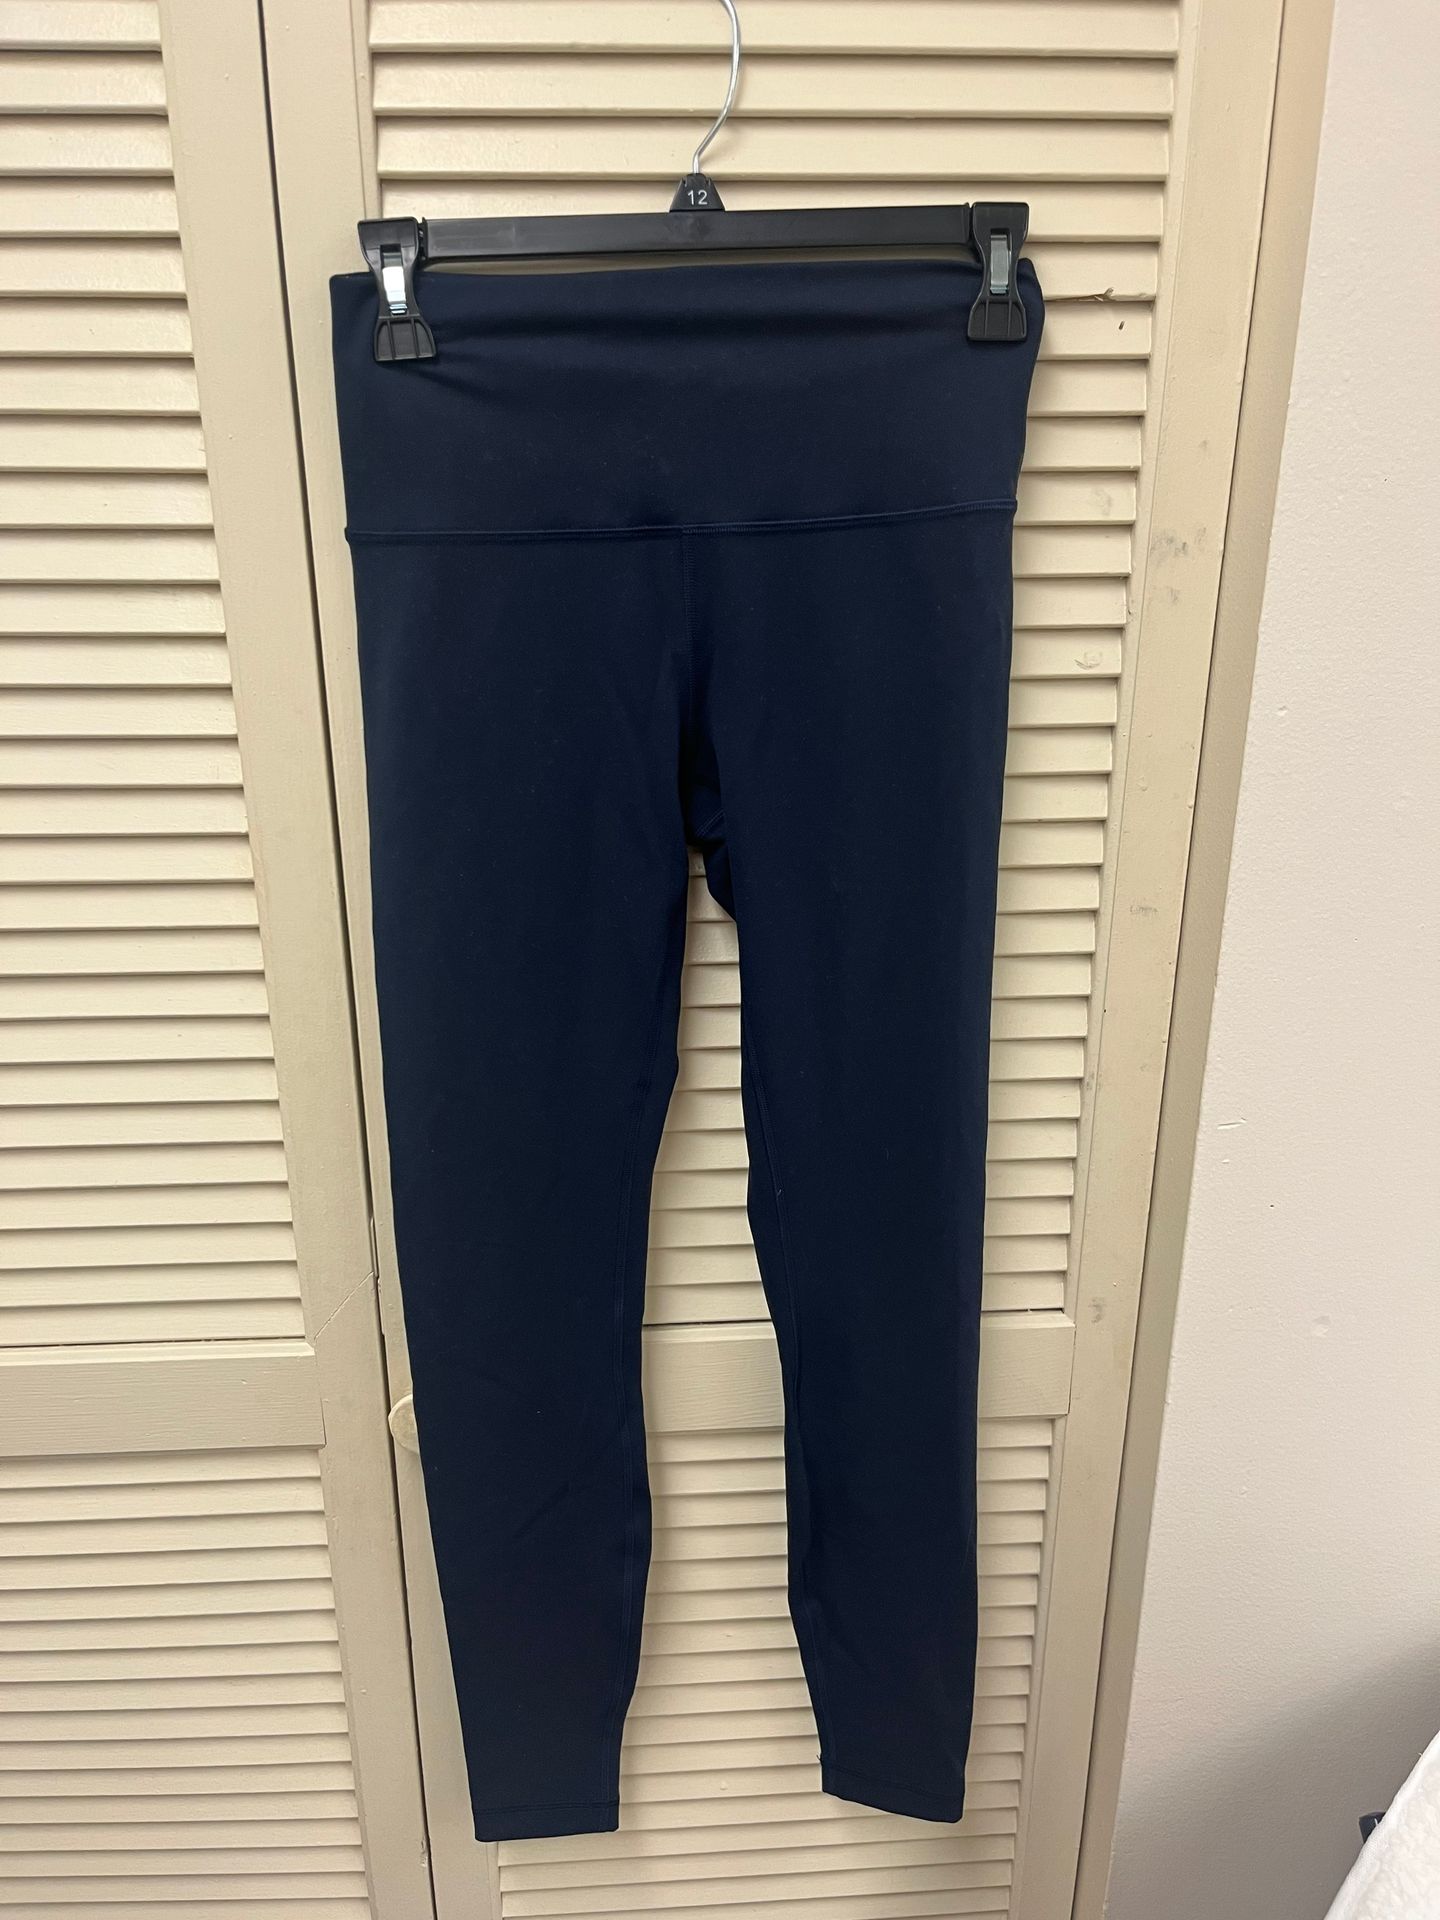 Lululemon Wunder Train High-Rise Tight 28' Blue Size 6 - $38 (61% Off  Retail) - From Mary